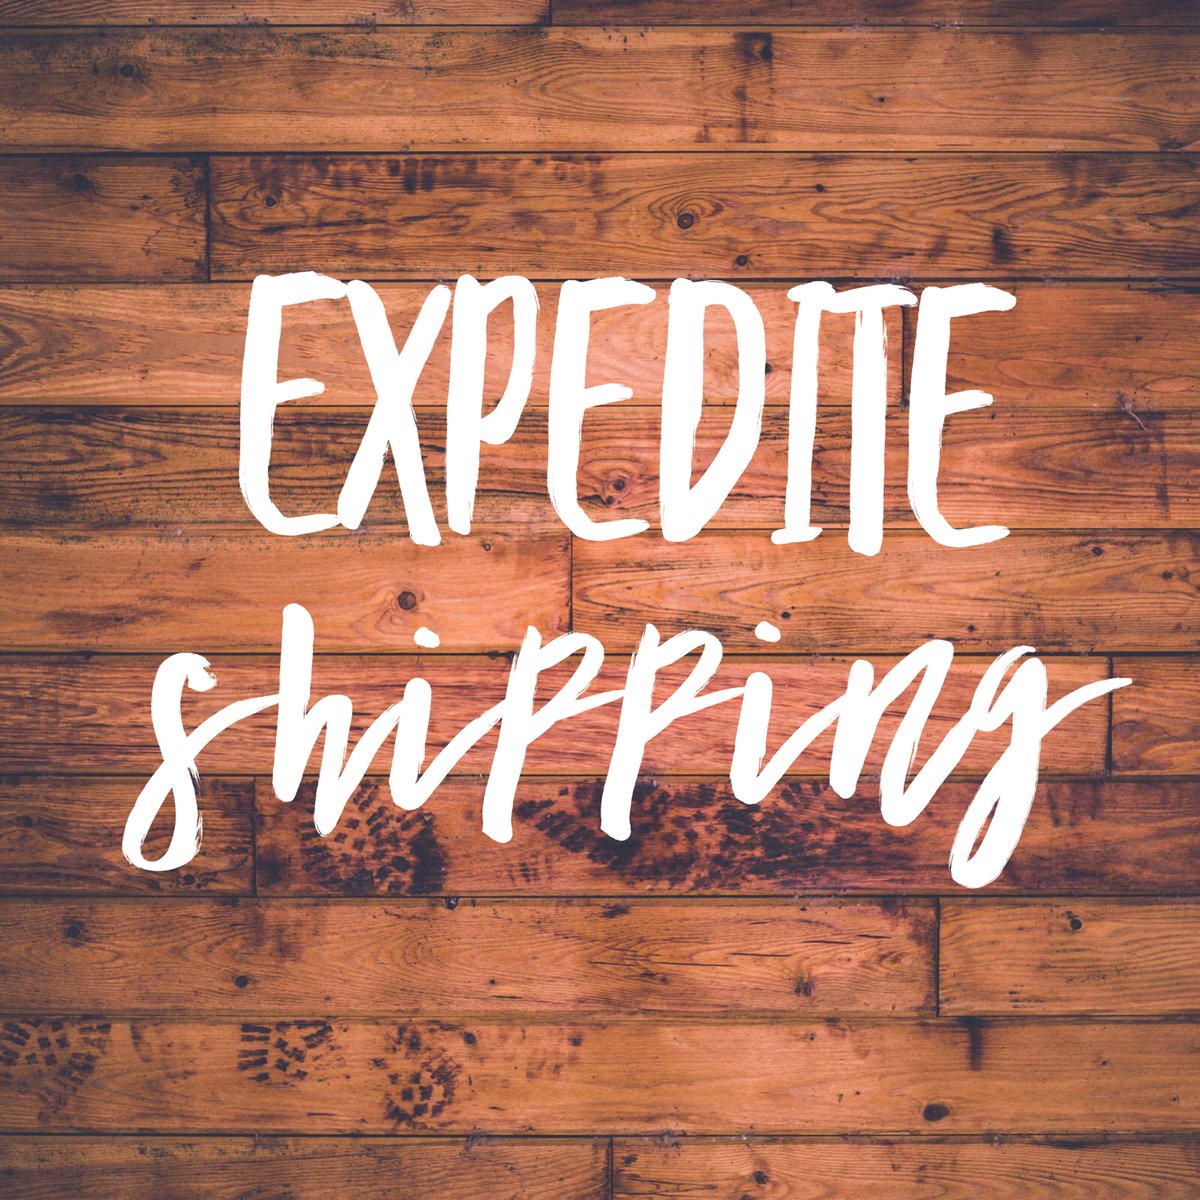 Image of Expedite shipping